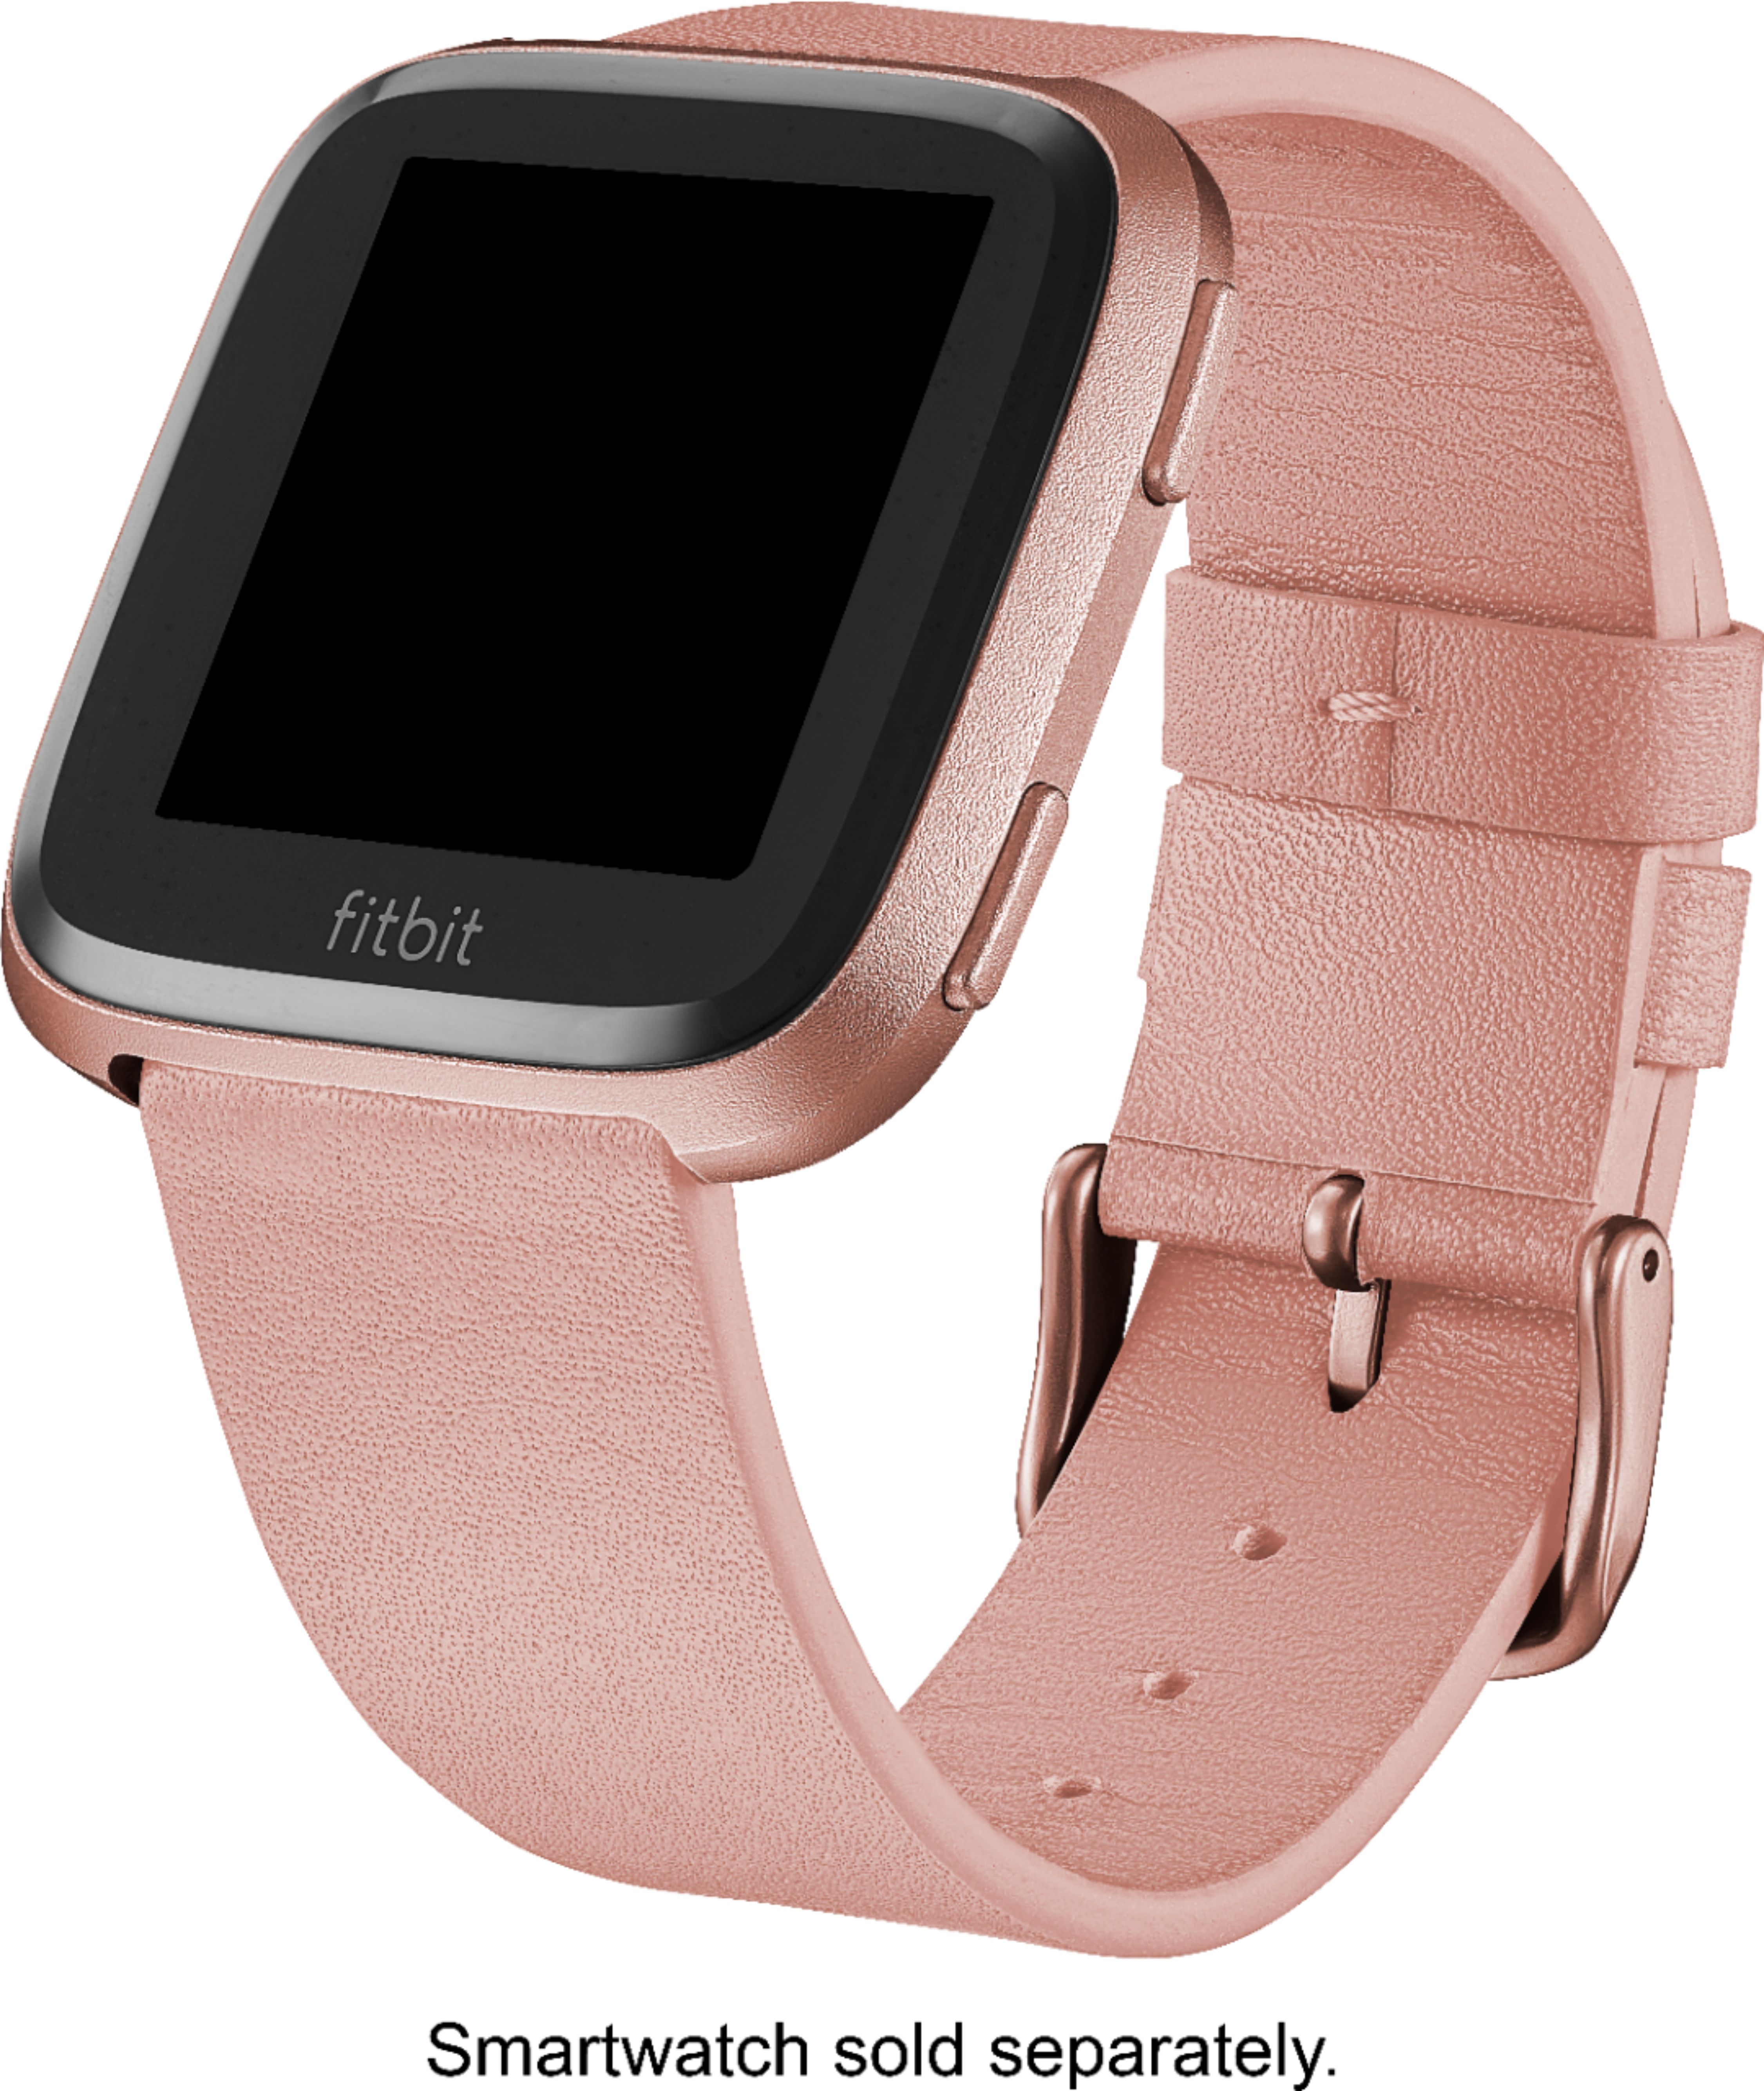 Platinum - Leather Watch Band for Fitbit Versa 2, Fitbit Versa and Fitbit Versa Lite - Pink